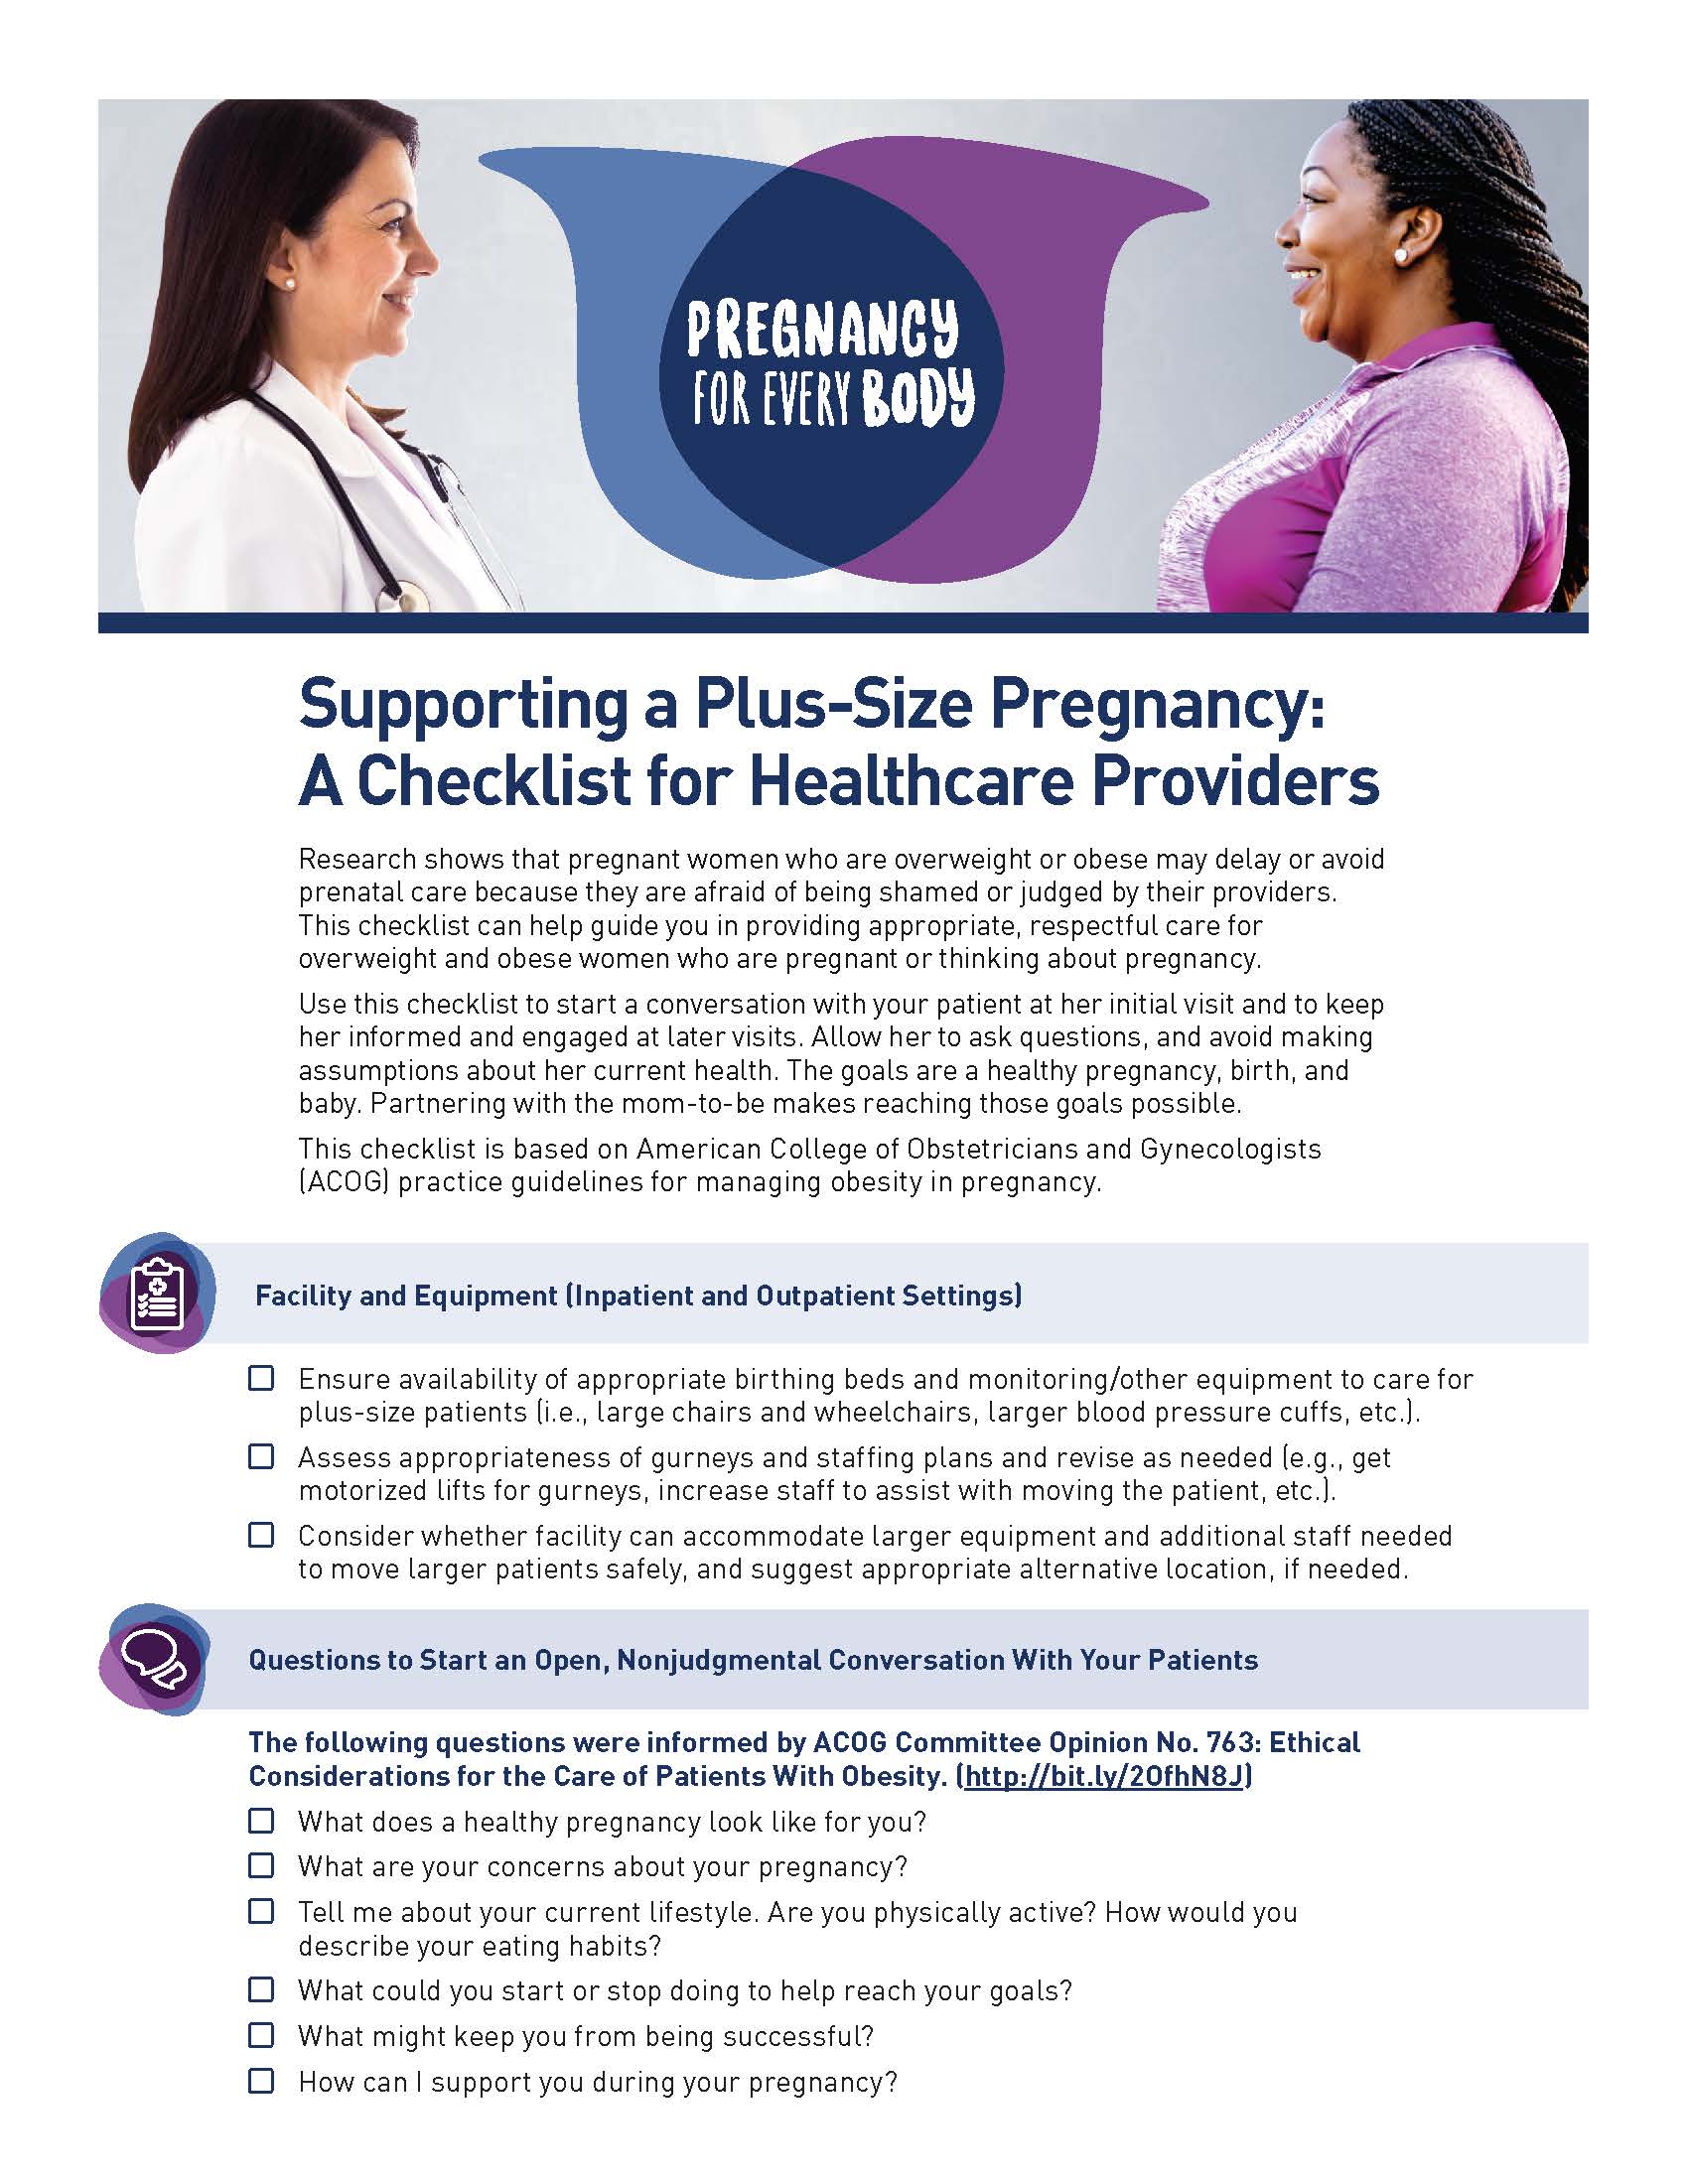 Image of the Pregnancy for Every Body Factsheet: Supporting a Plus-Size Pregnancy: A Checklist for Healthcare Providers.